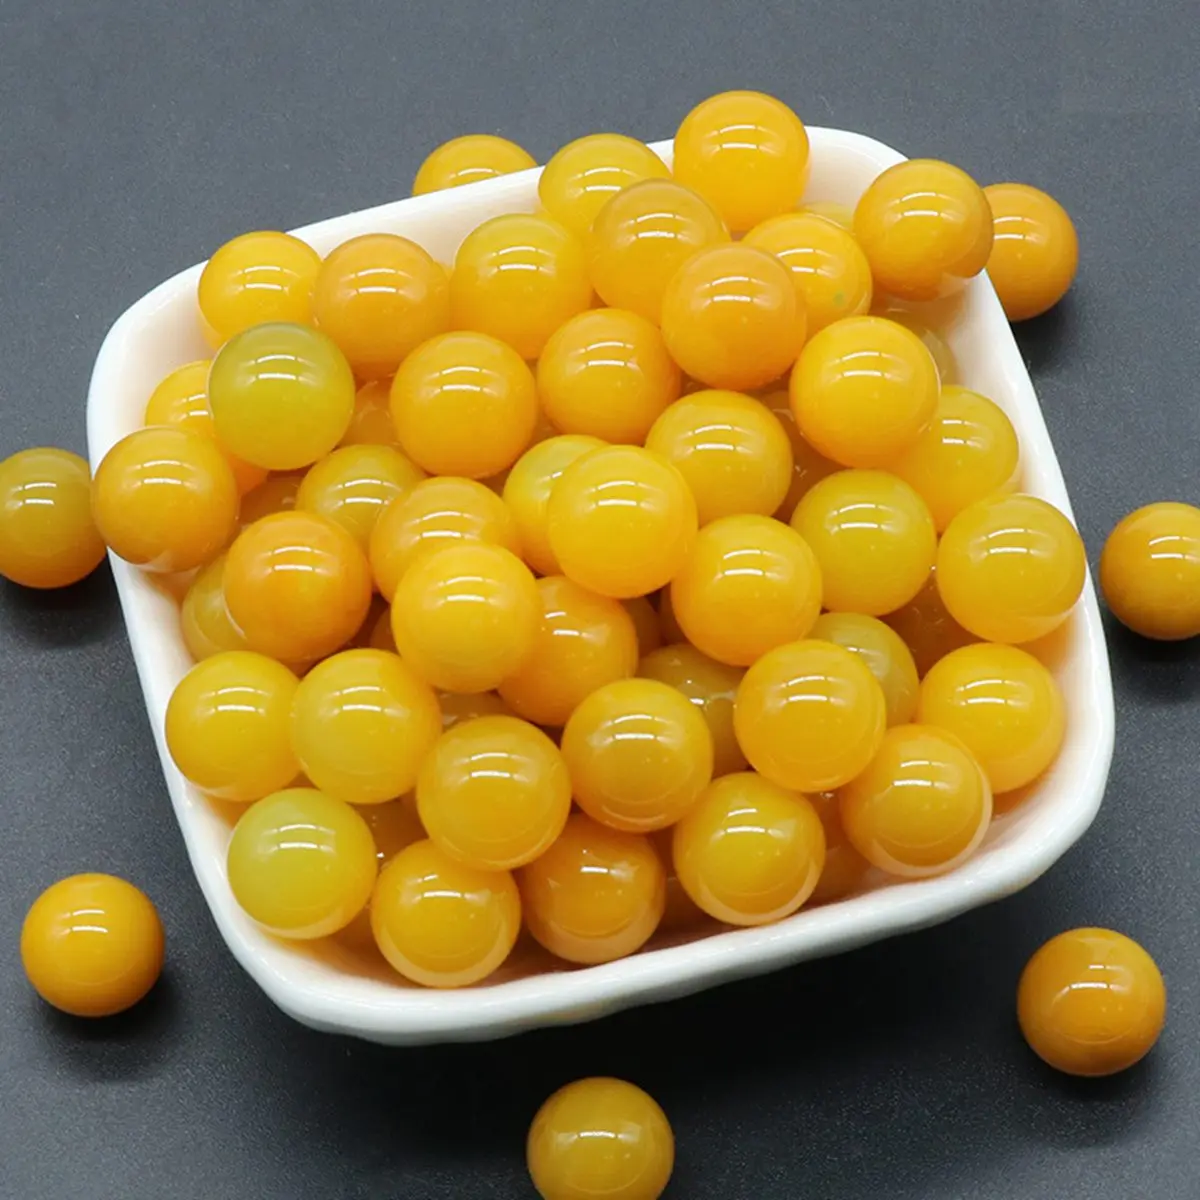 

5PCS 12MM Yellow Agate Round Beads for DIY Making Jewelry NO-Drilled Hole Healing Energy Natural Cute Stone Crystal Sphere Ball